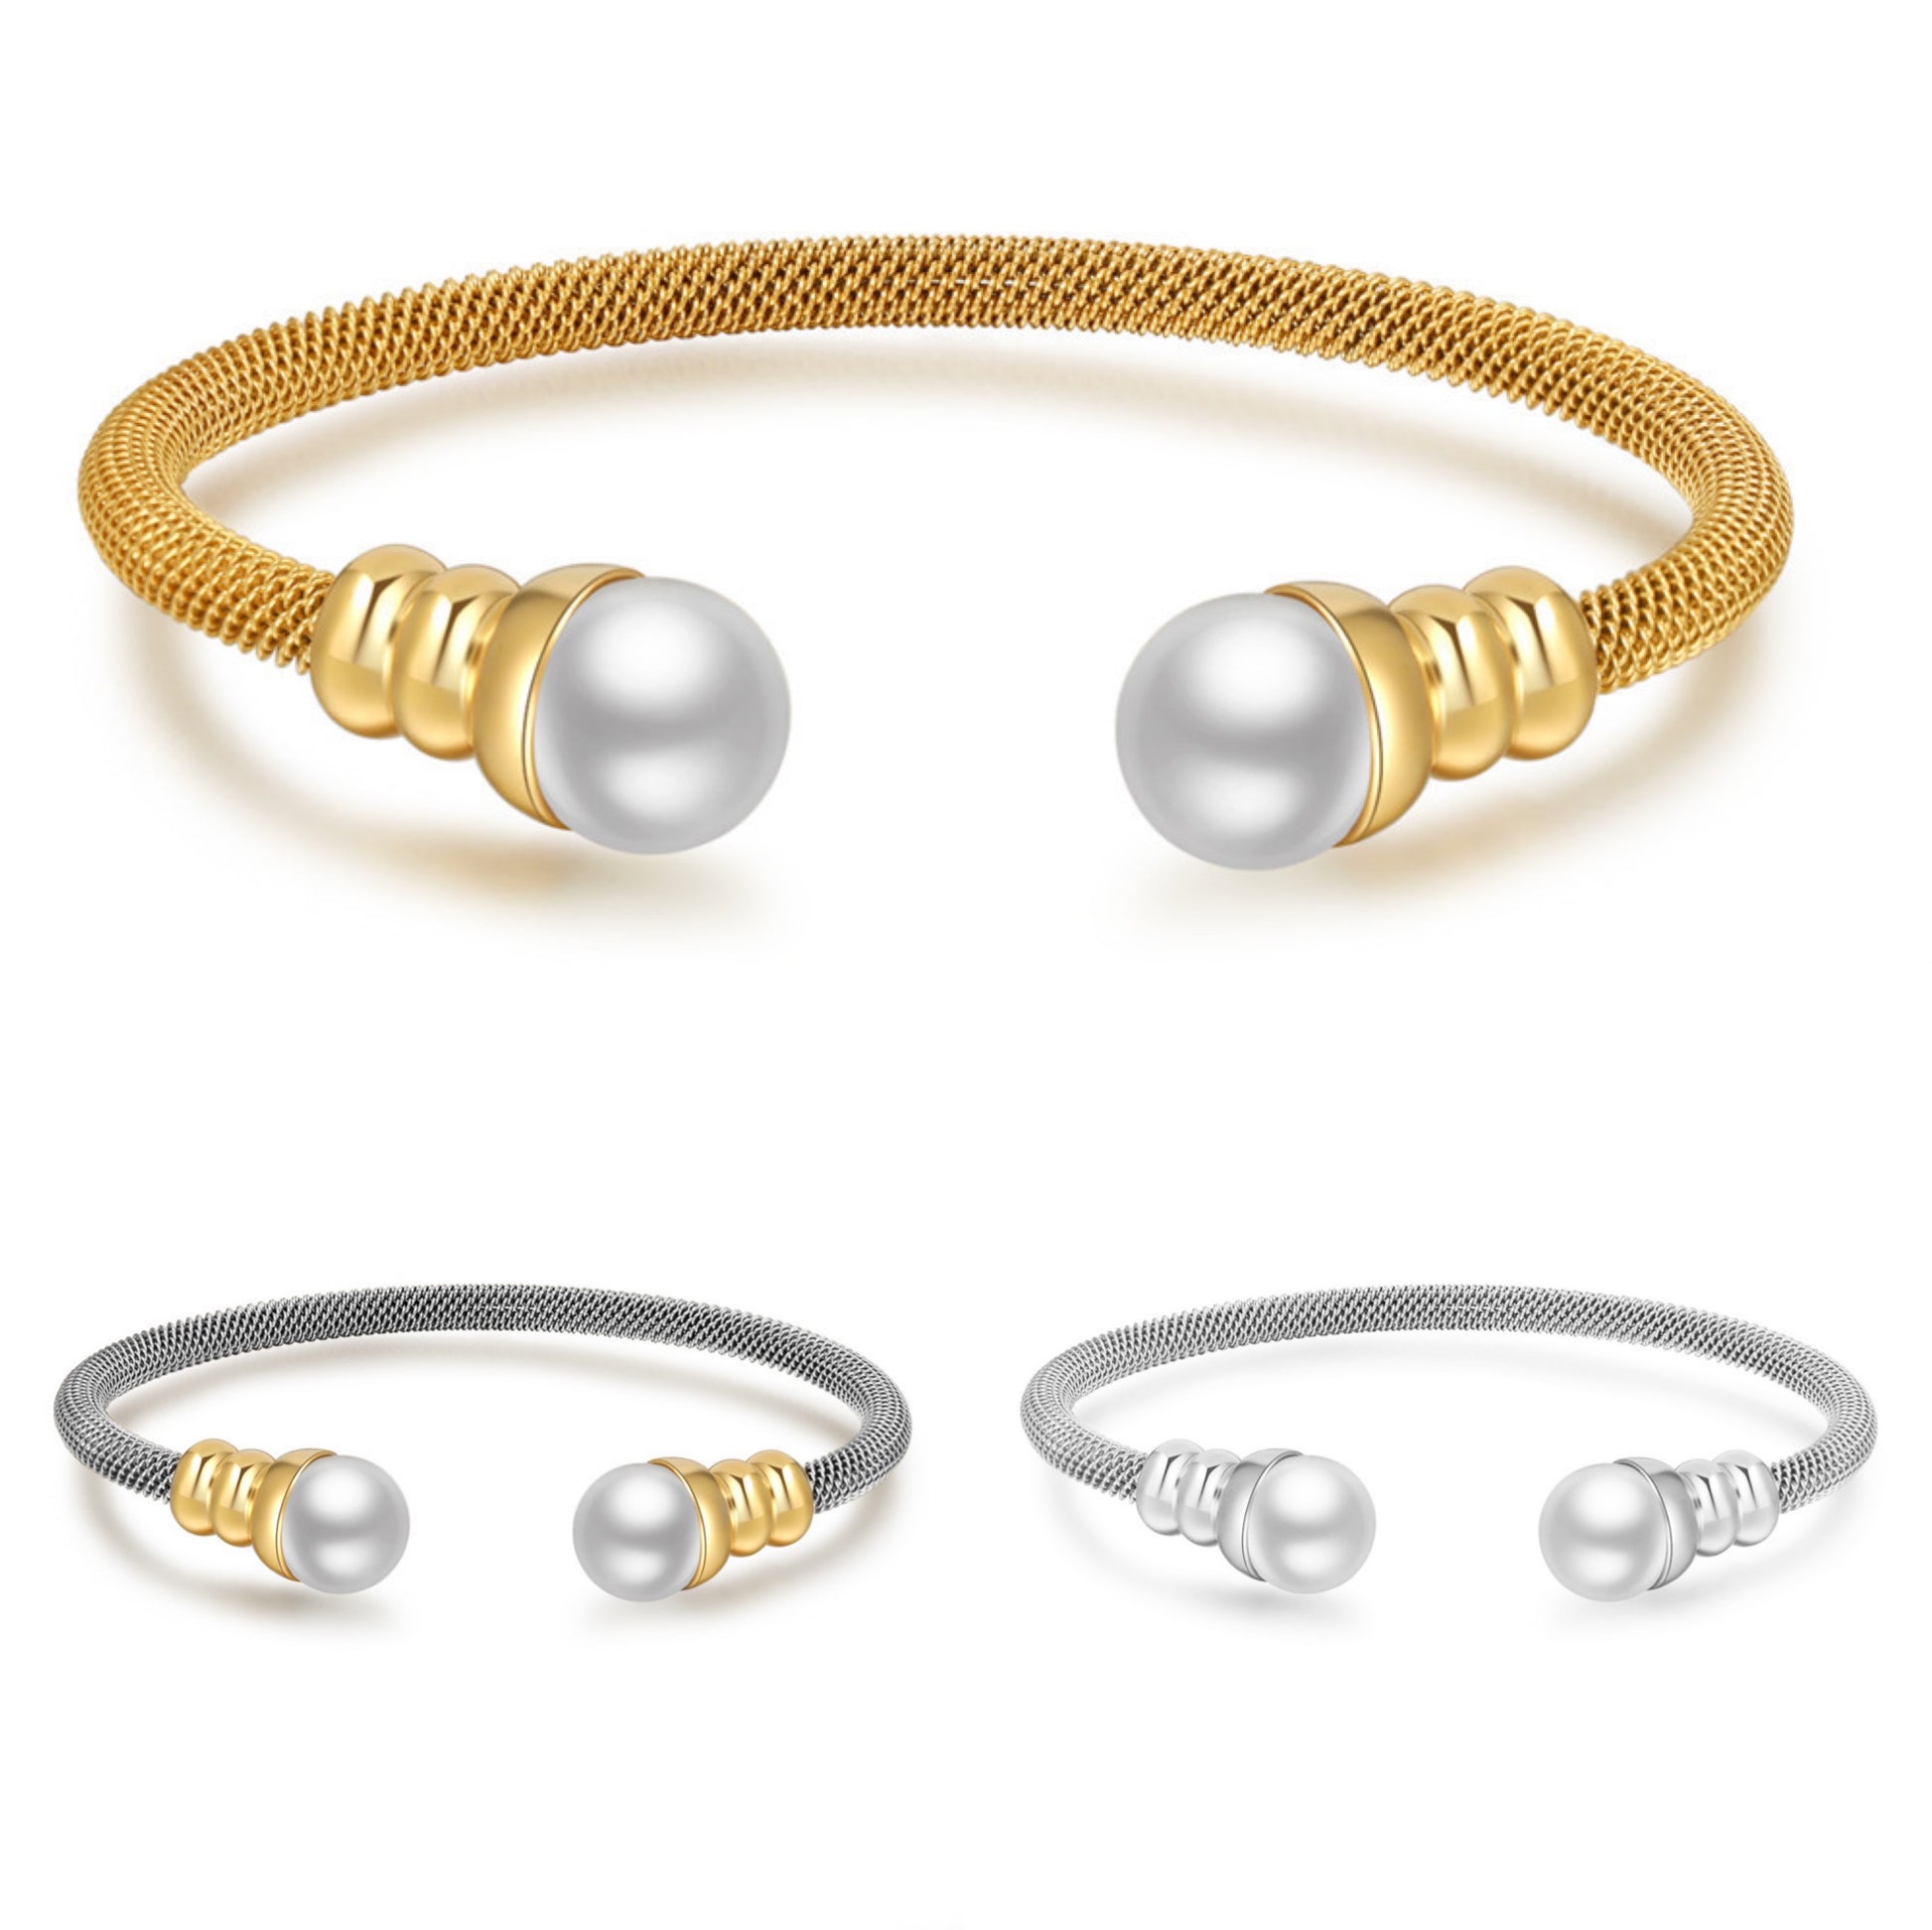 5pcs/lot Stainless Steel Pearl Open Bangle for Women Mix Color-5pcs Women Bracelets Charms Beads Beyond